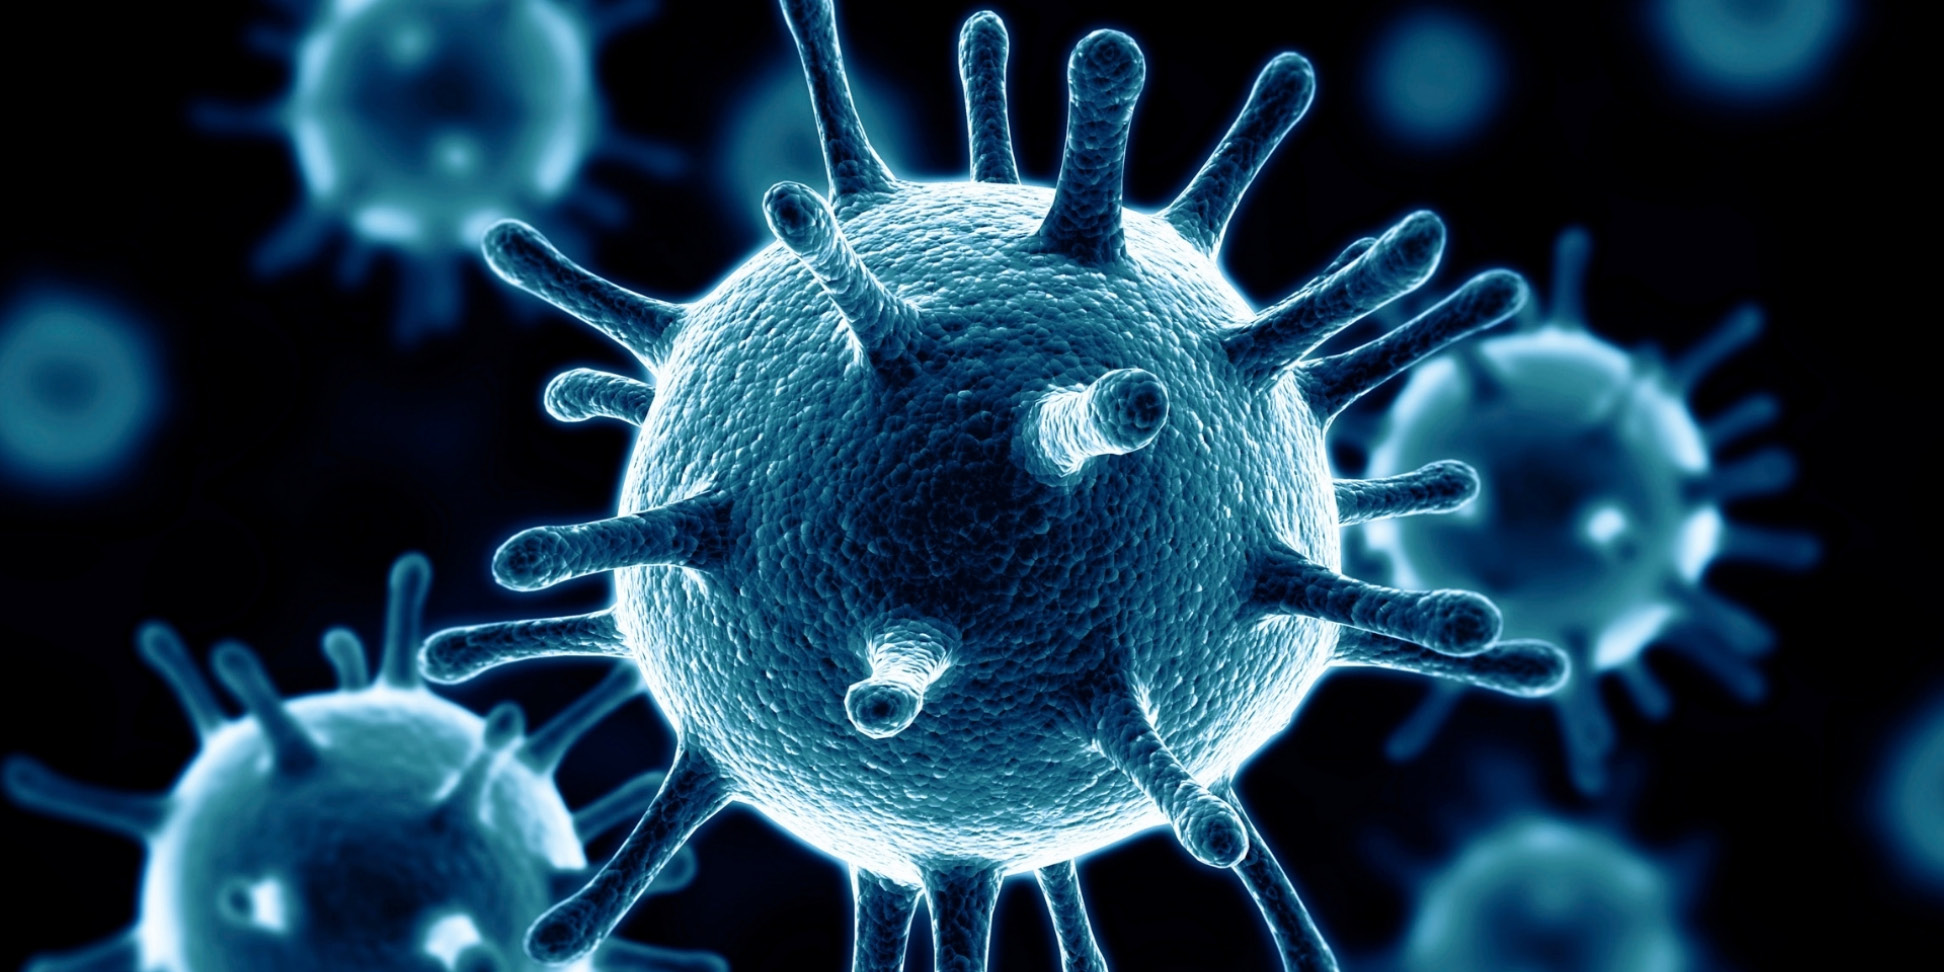 Virus background with disease cells